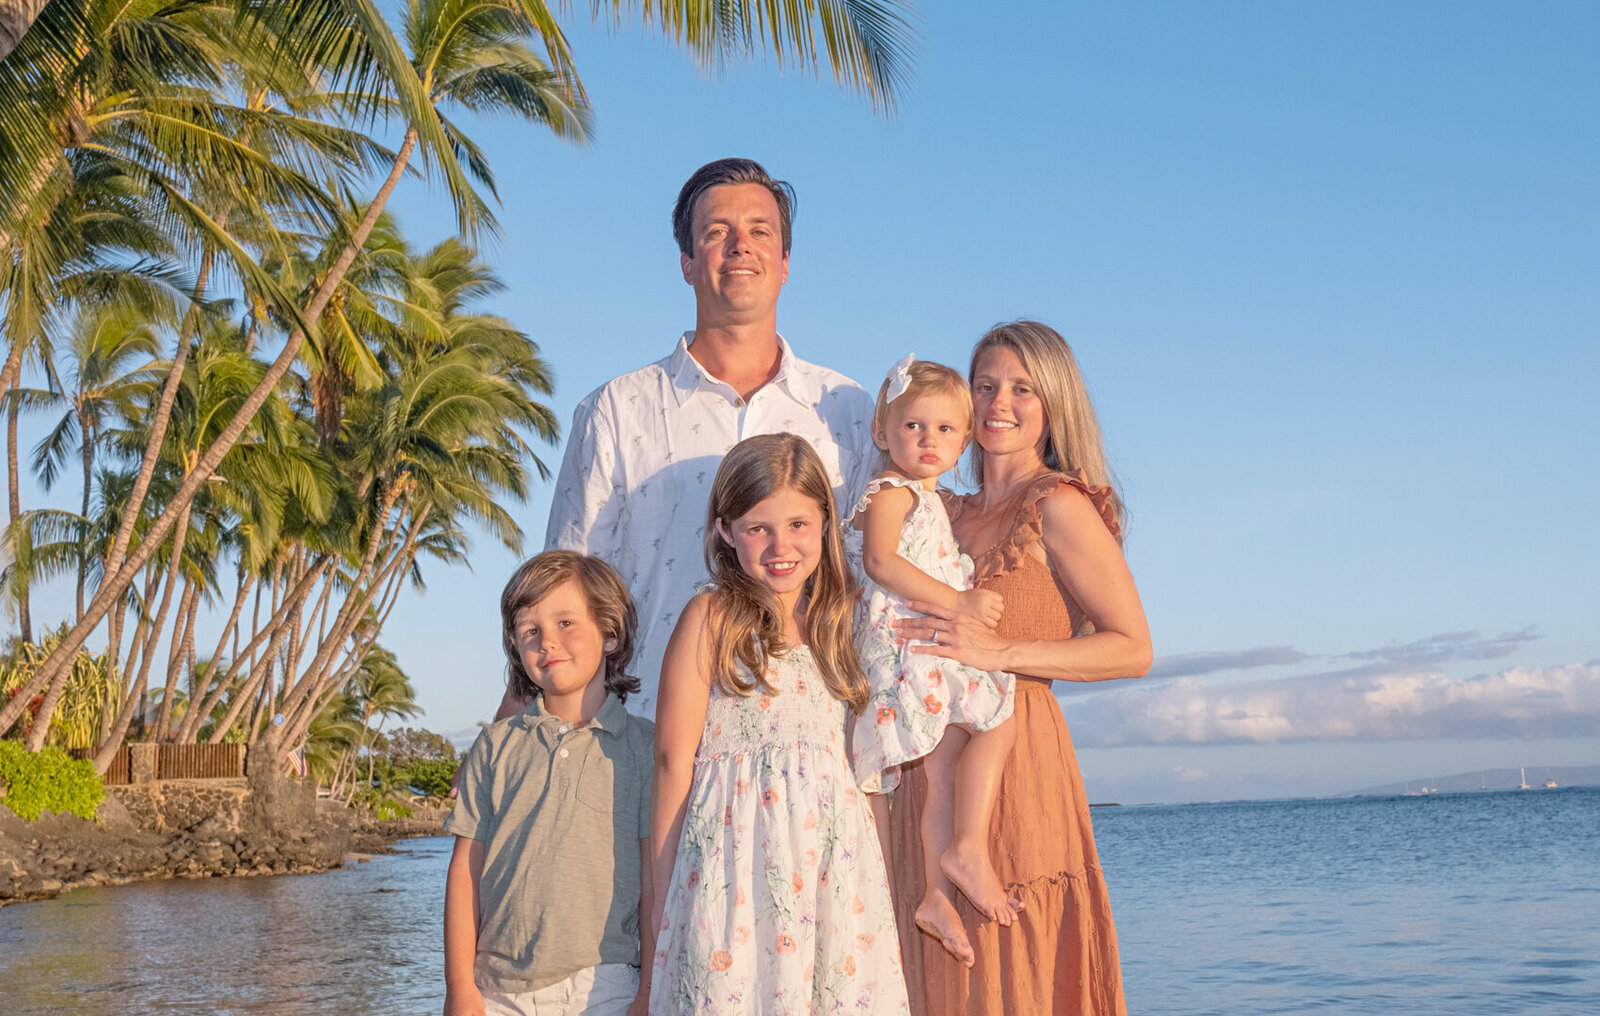 Affordable portrait photography in Oahu